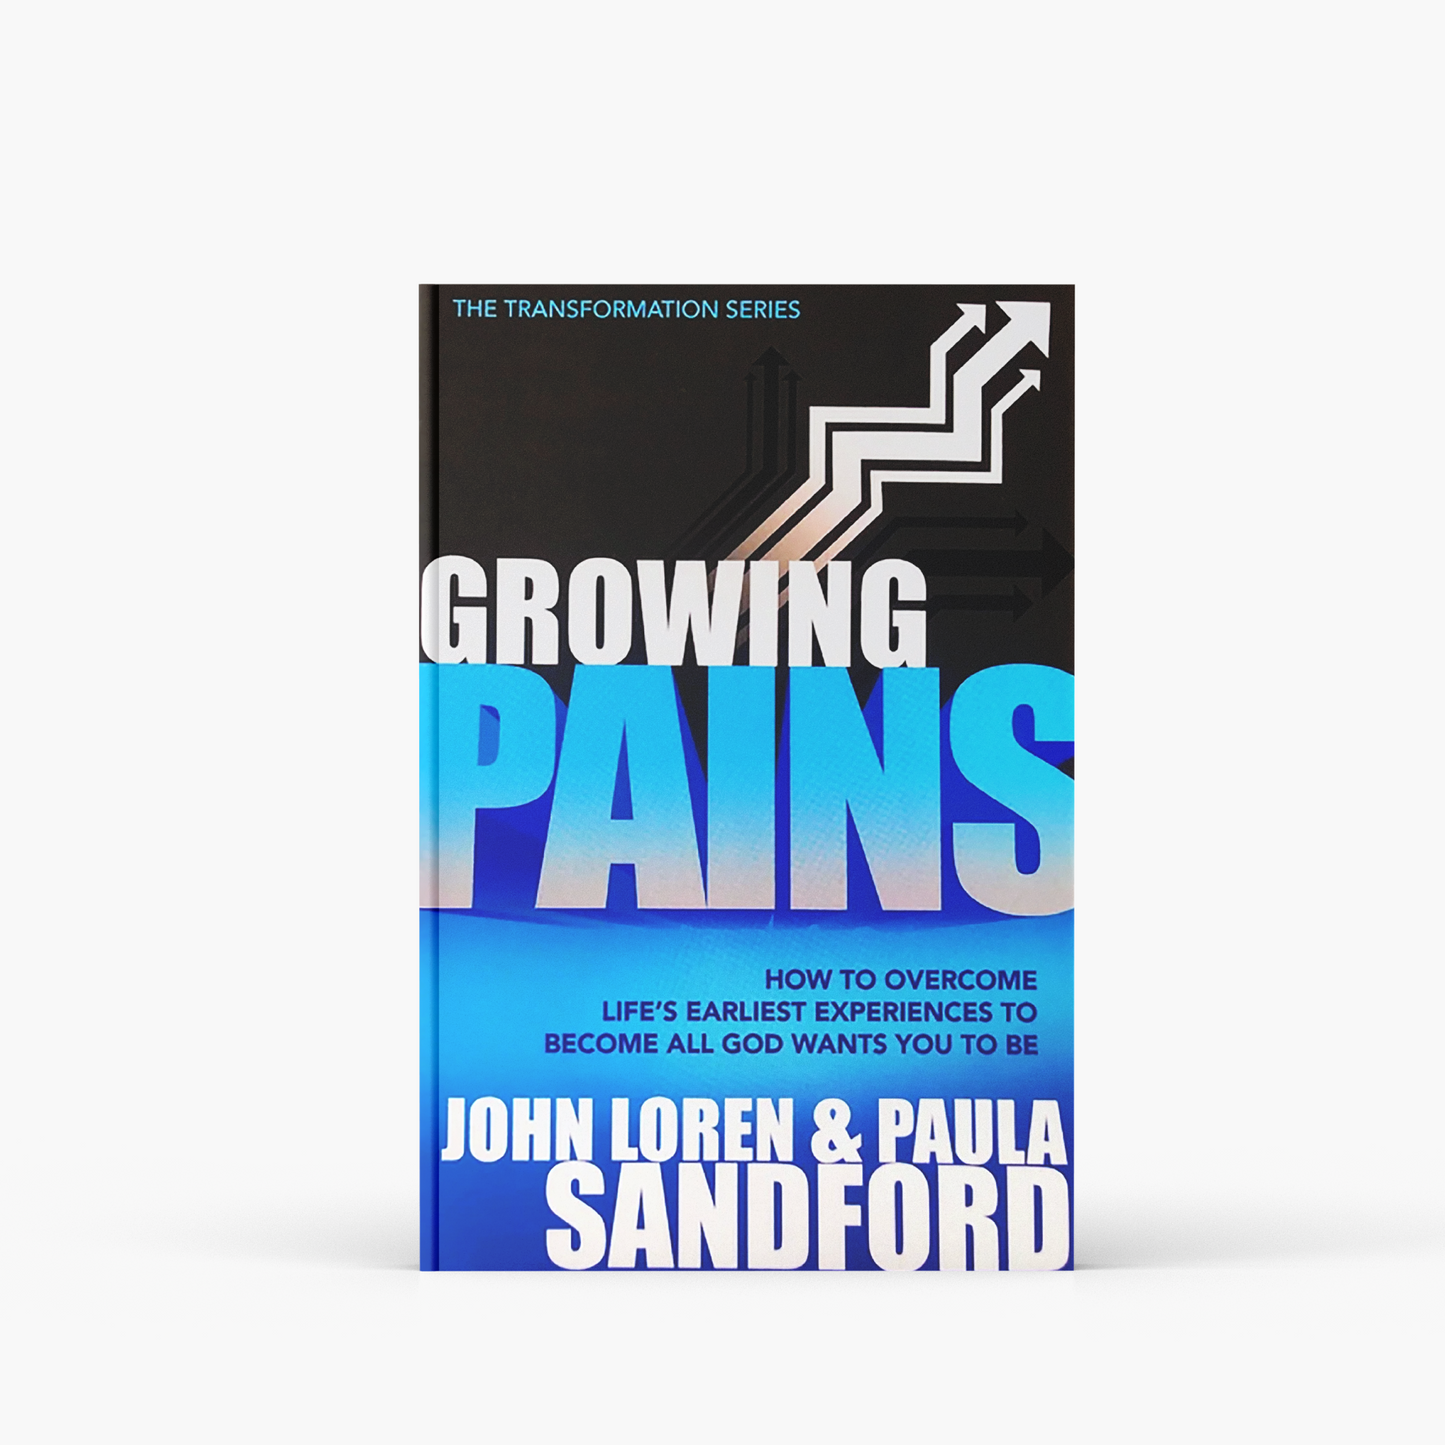 Growing Pains:  How to Overcome Life's Earliest Experiences to Become All God Wants You to Be